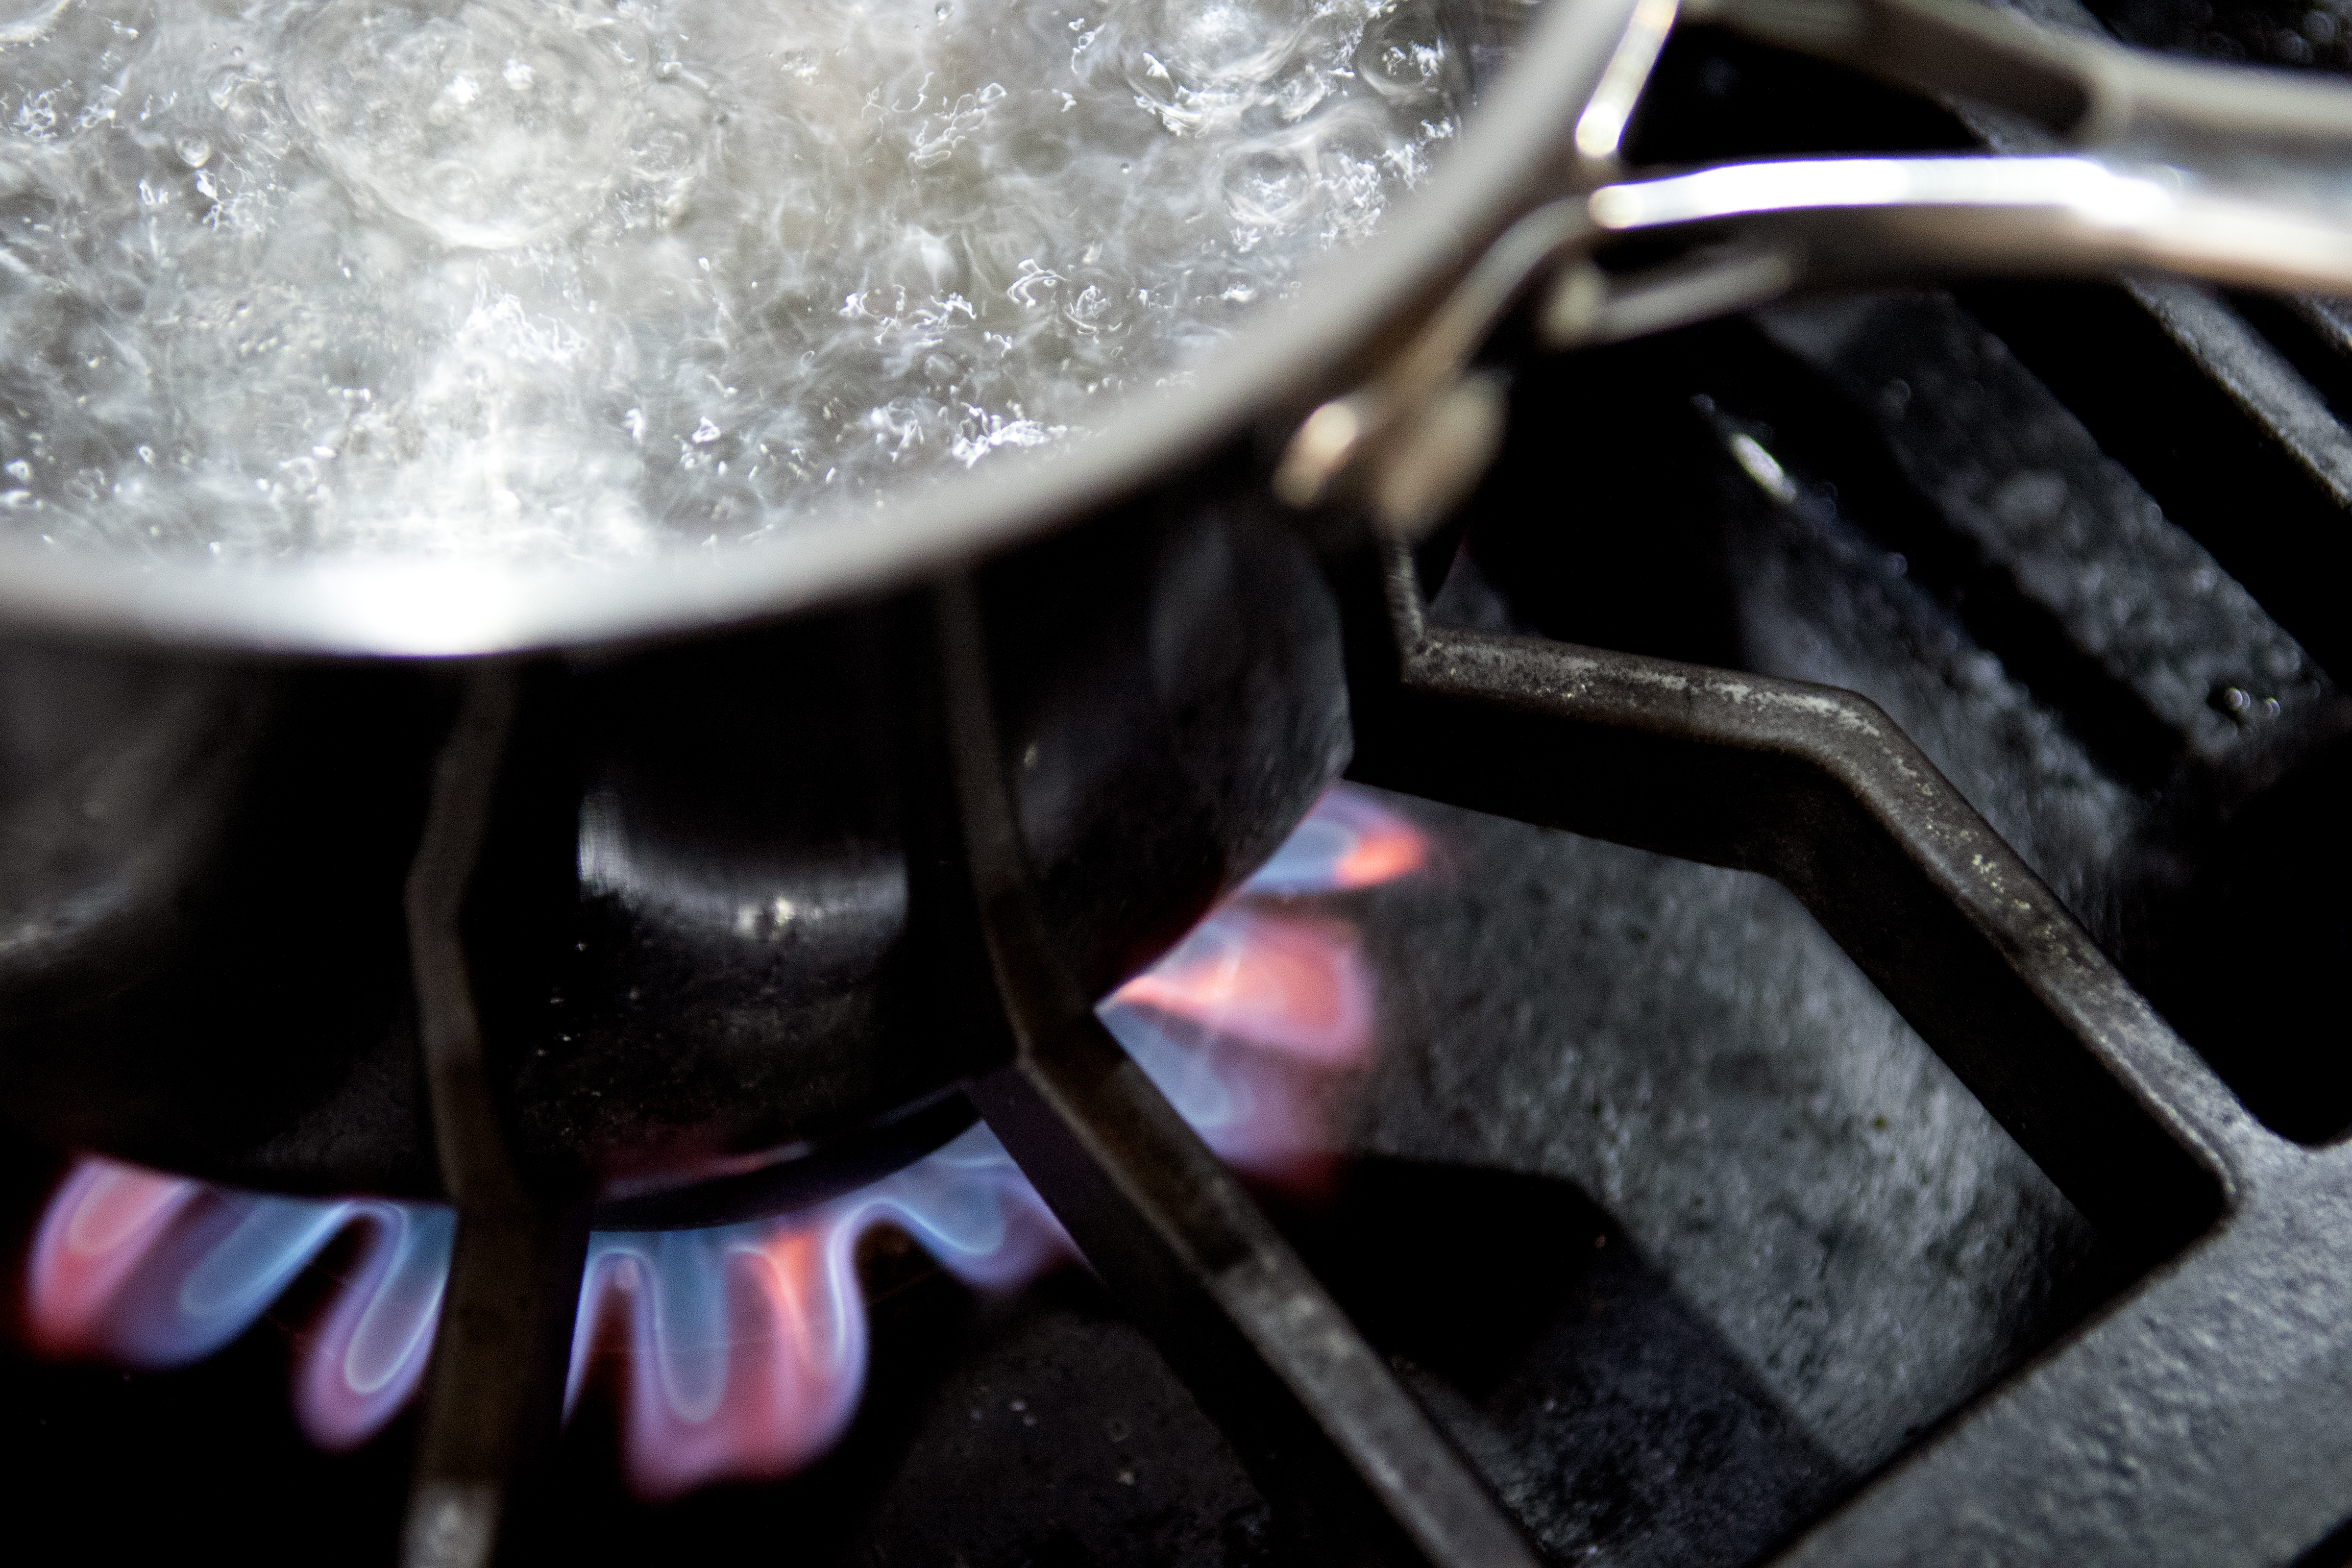 Water boiling on a gas stove | Source: Getty Images